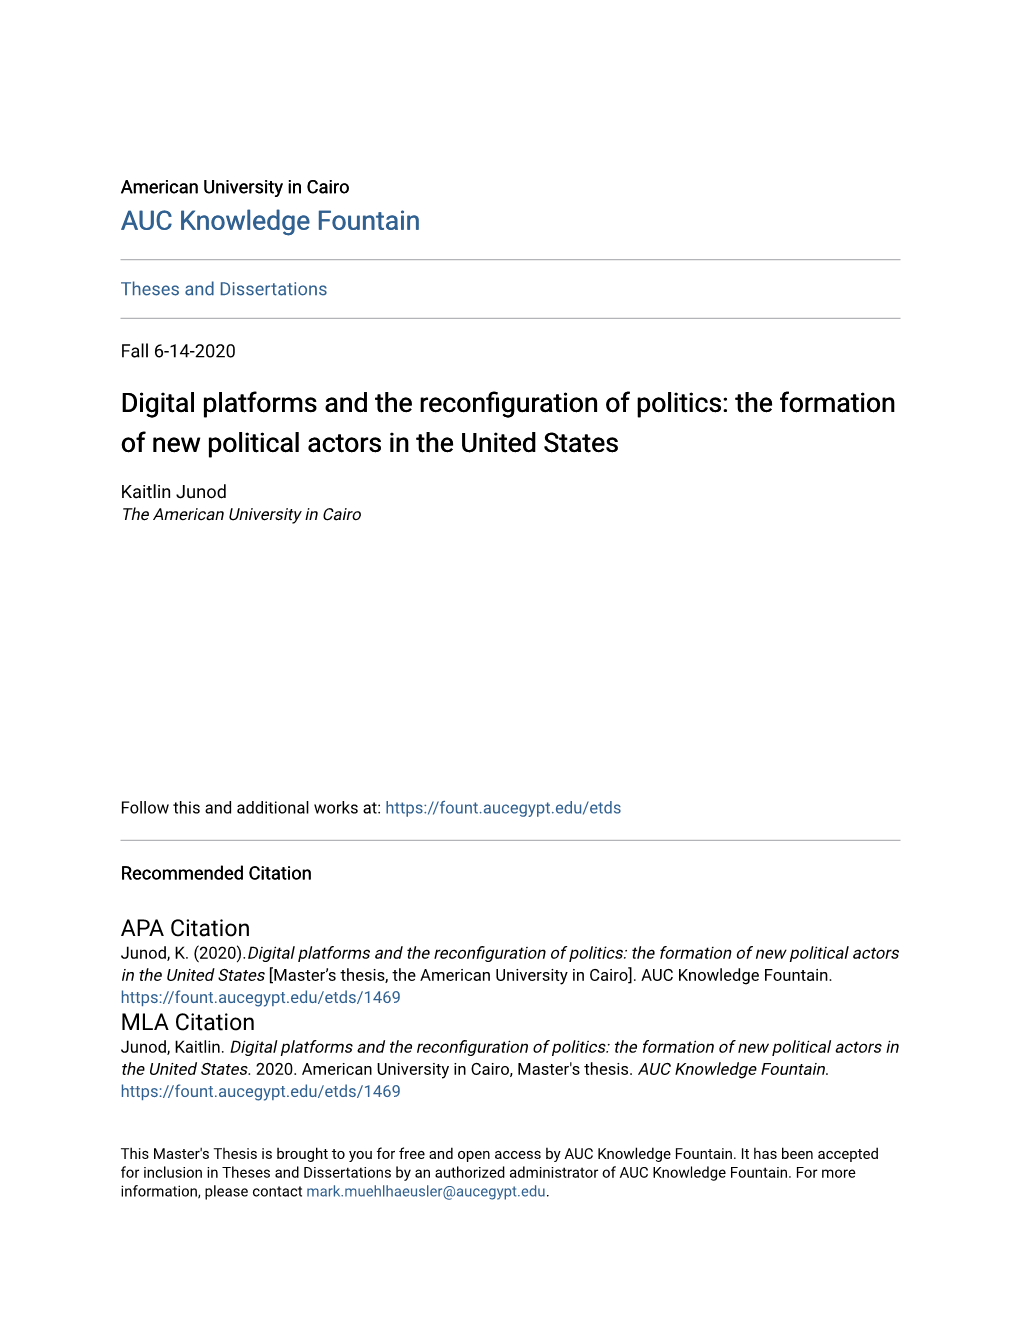 Digital Platforms and the Reconfiguration of Politics: the Formation of New Political Actors in the United States